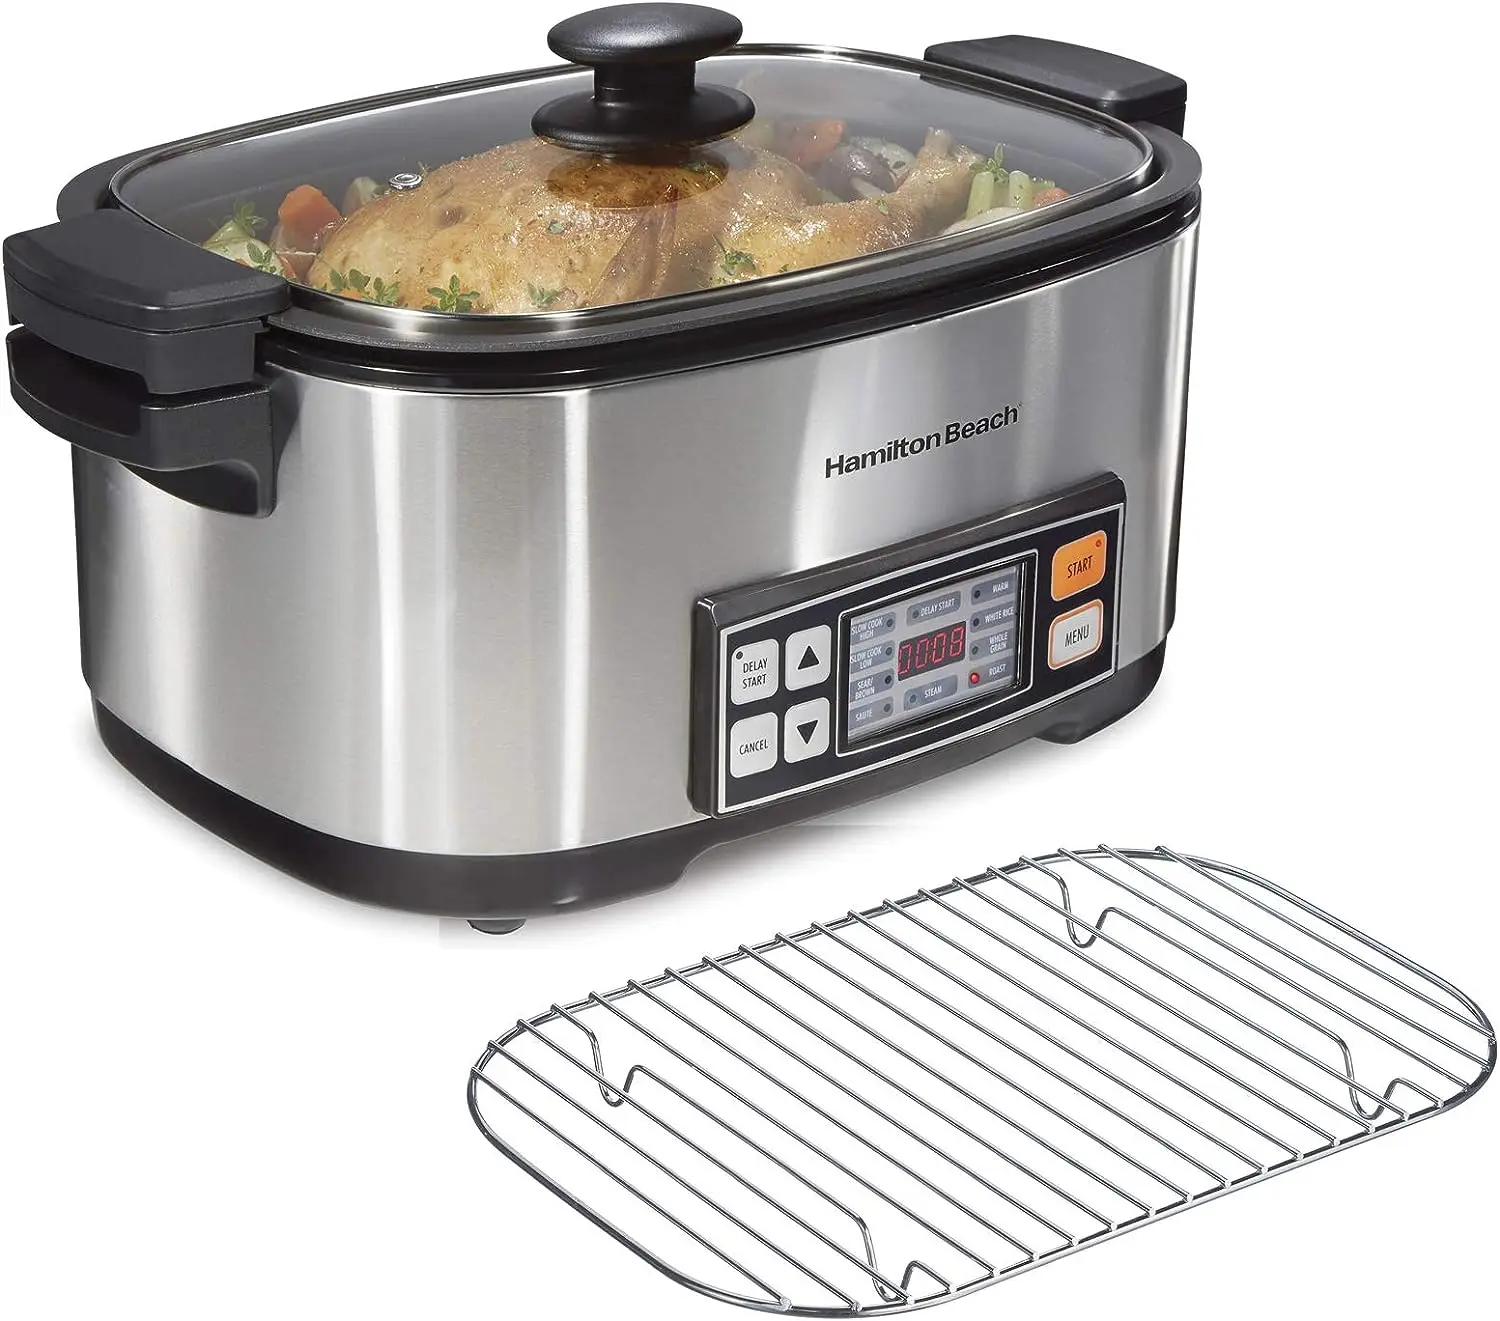 

Digital Programmable Slow Cooker with 6 quart Nonstick Crock, Sear, Saute, Steam, Rice Functions, Stainless Steel (33065) Coffee